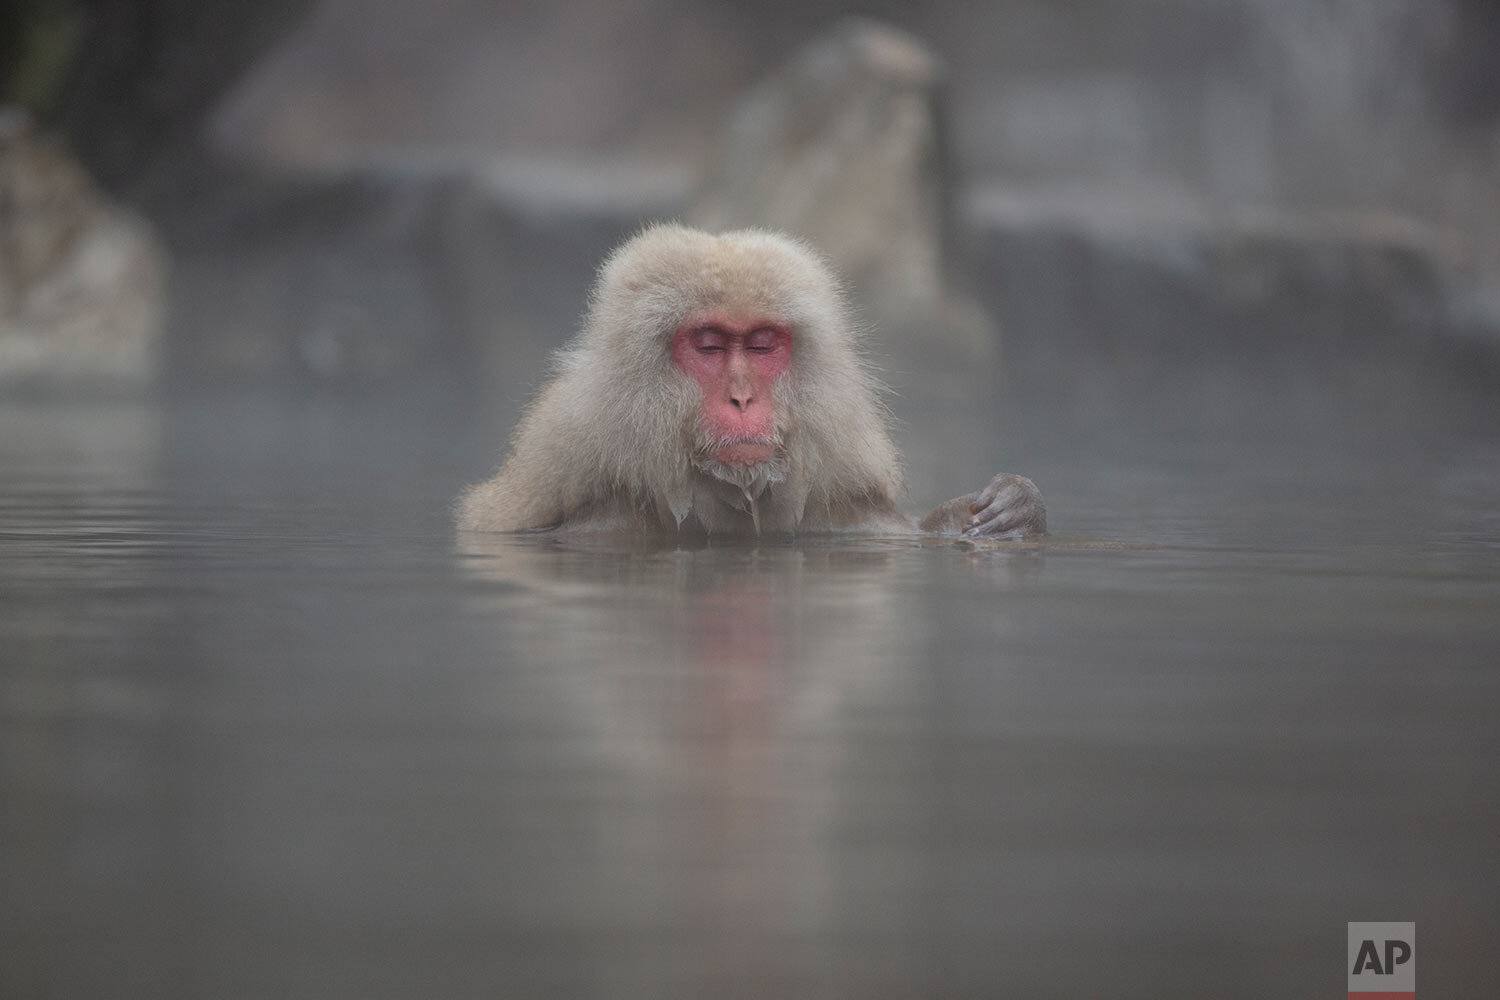  A Japanese macaque, also known as a snow monkey, soaks in a hot spring in Jigokudani valley in Nagano Prefecture, northwest of Tokyo Saturday, March 6, 2021. (AP Photo/Kiichiro Sato) 